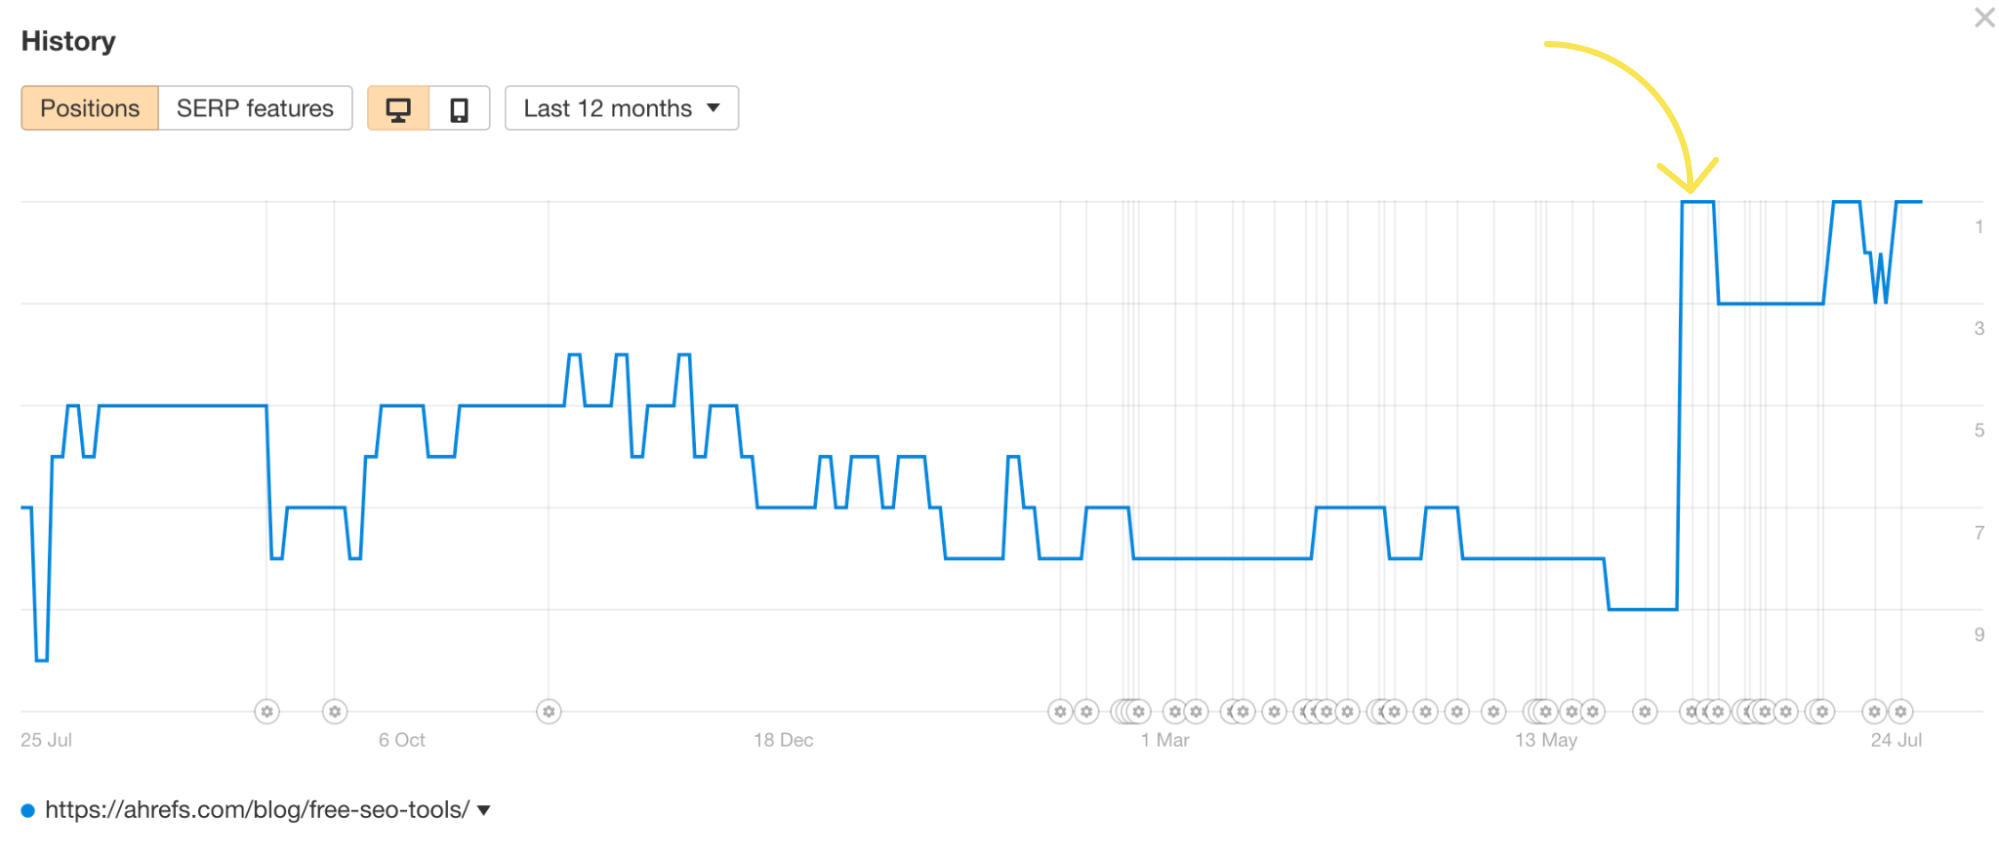 The spike in rankings after an update, via Ahrefs' Rank Tracker
